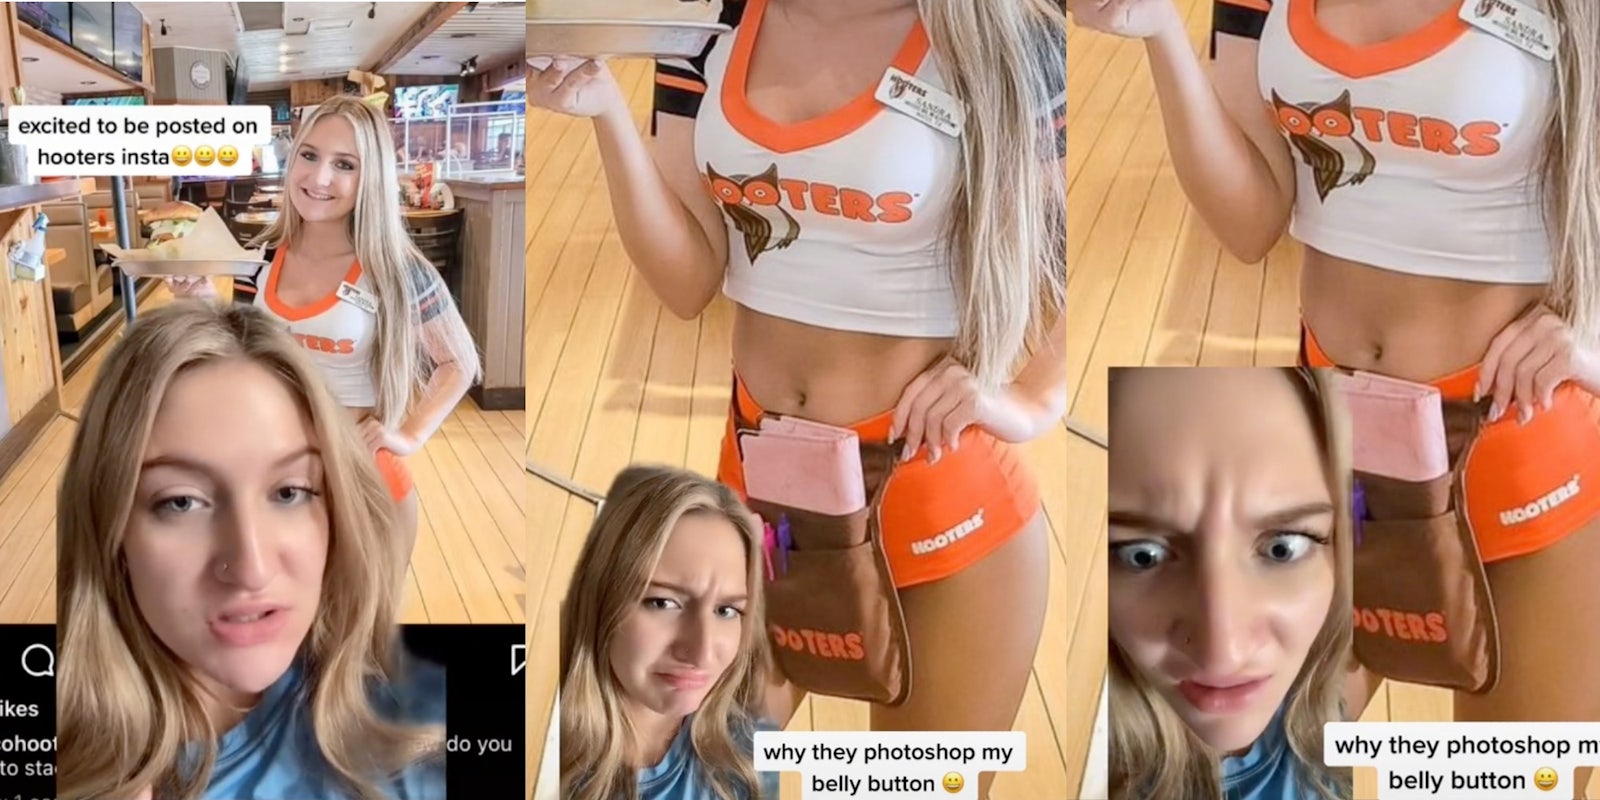 Hooters waitress accuses restaurant of Photoshopping her belly button